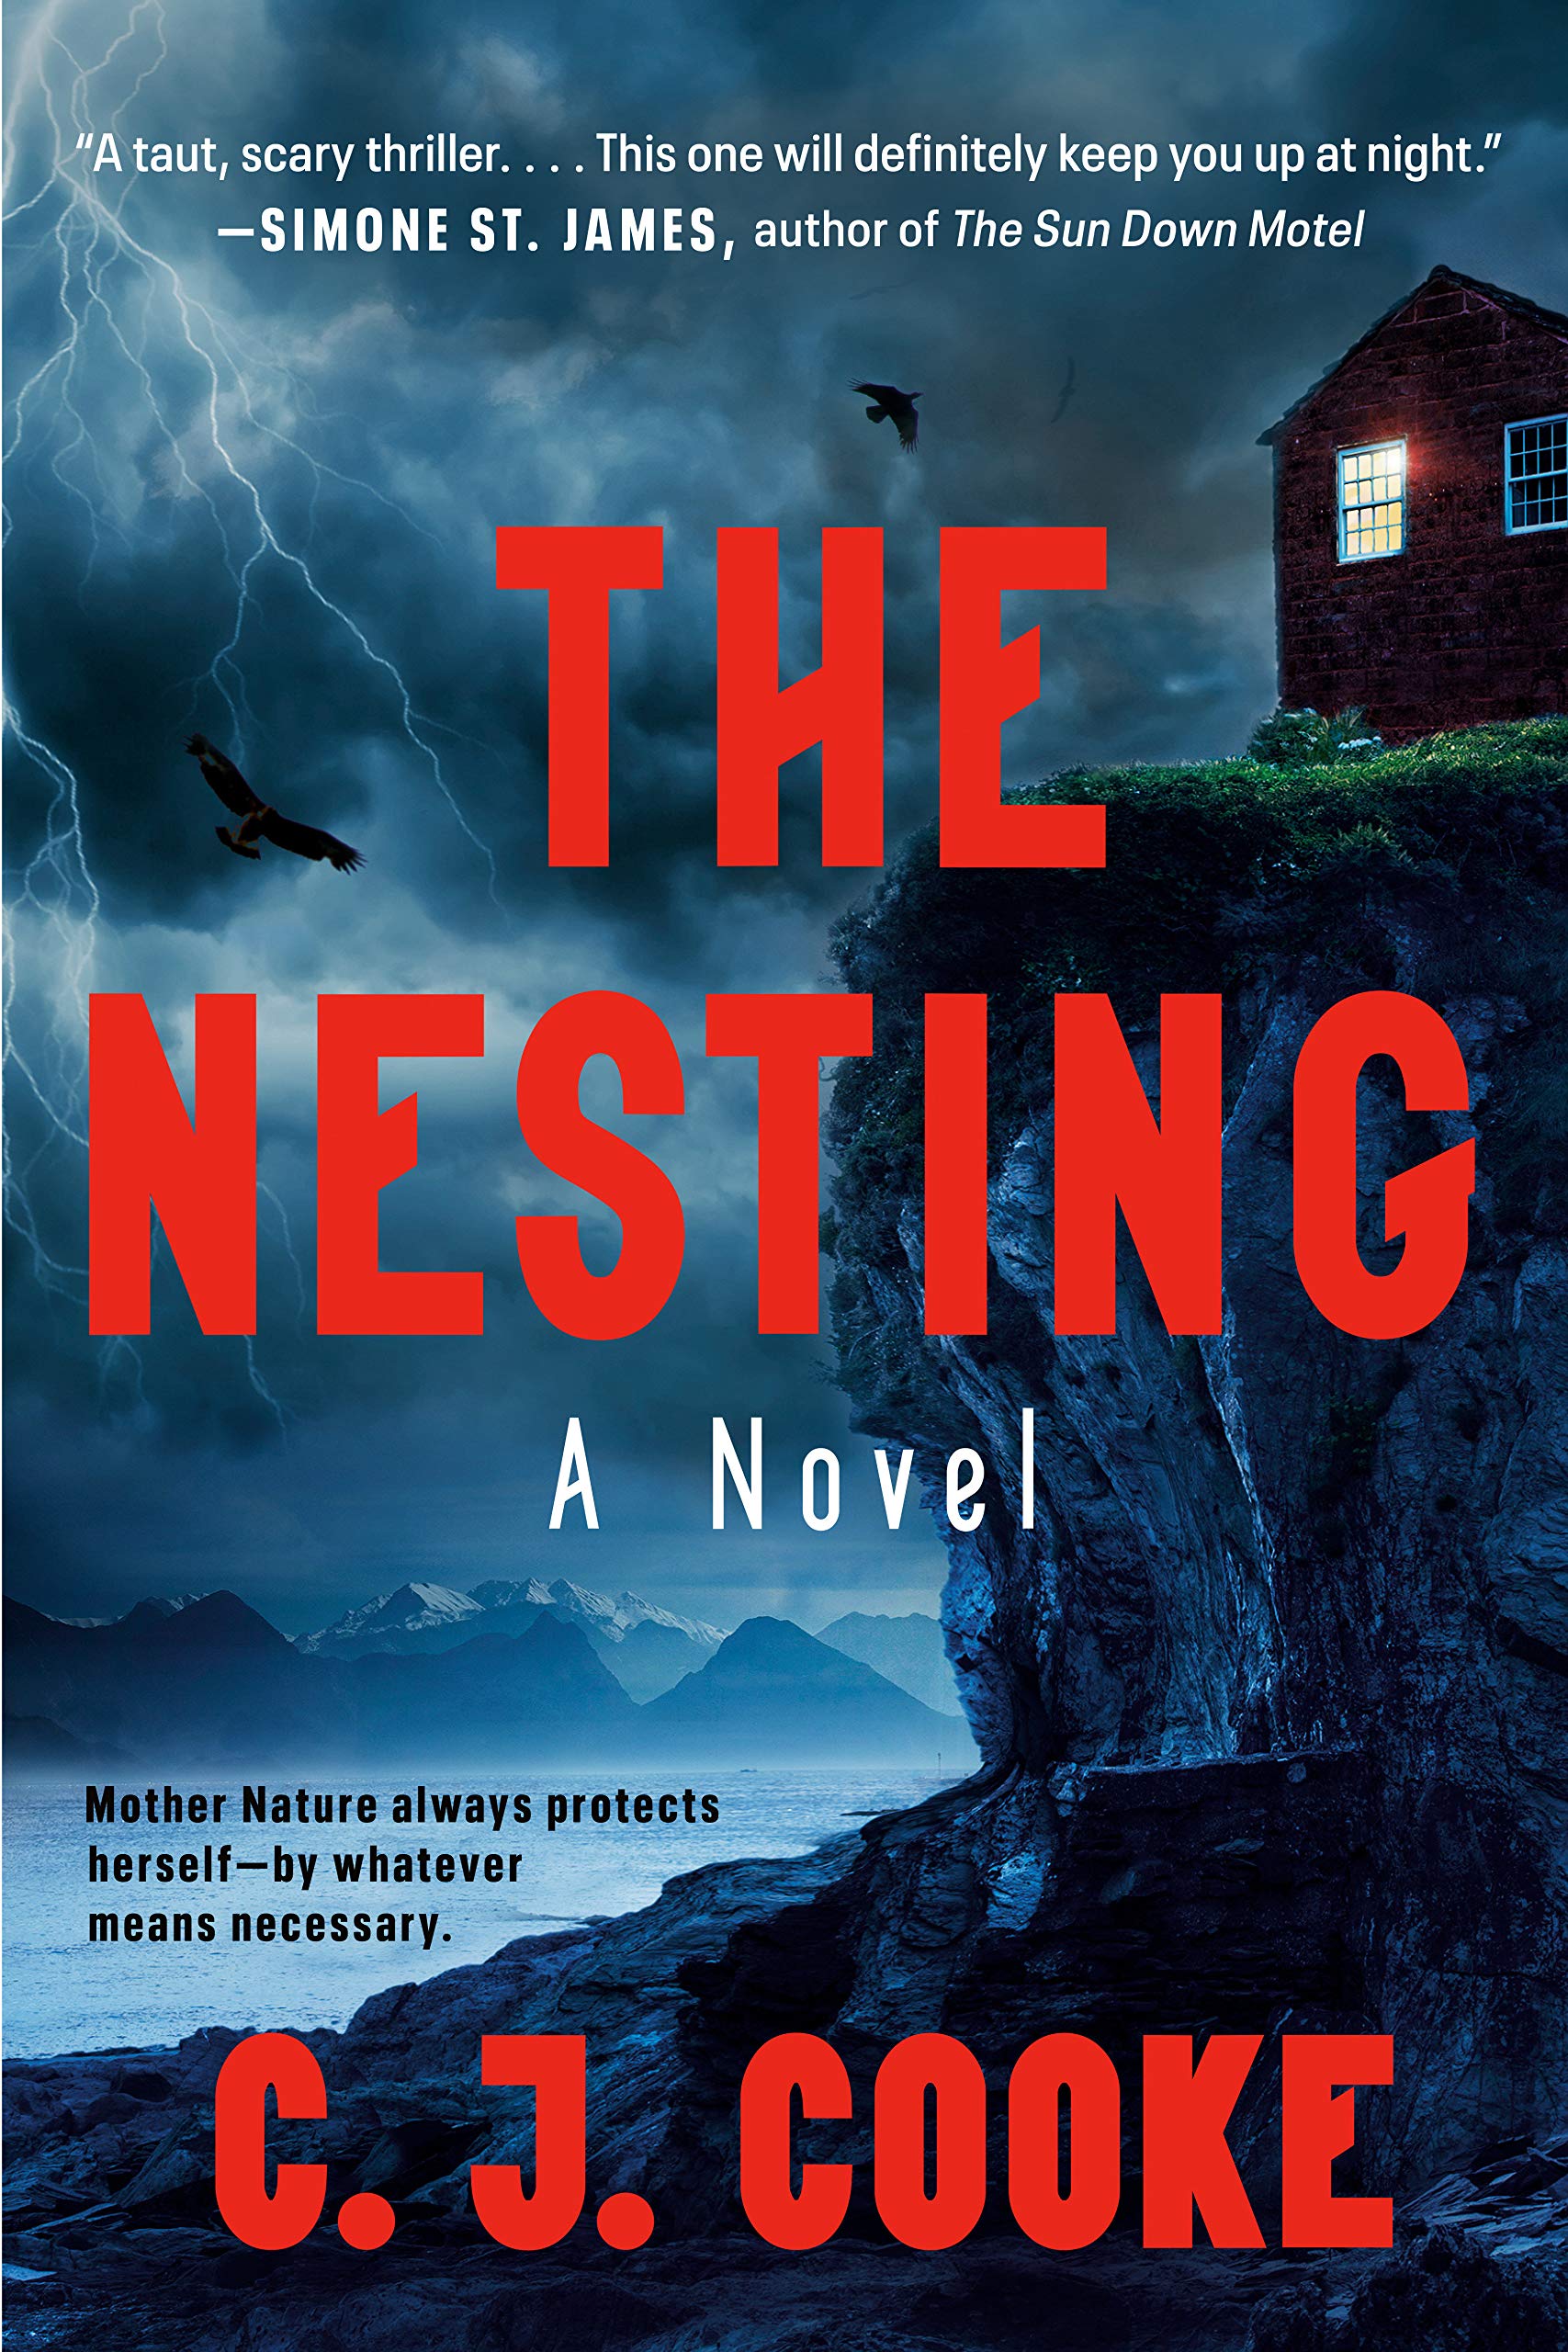 Image for "The Nesting"